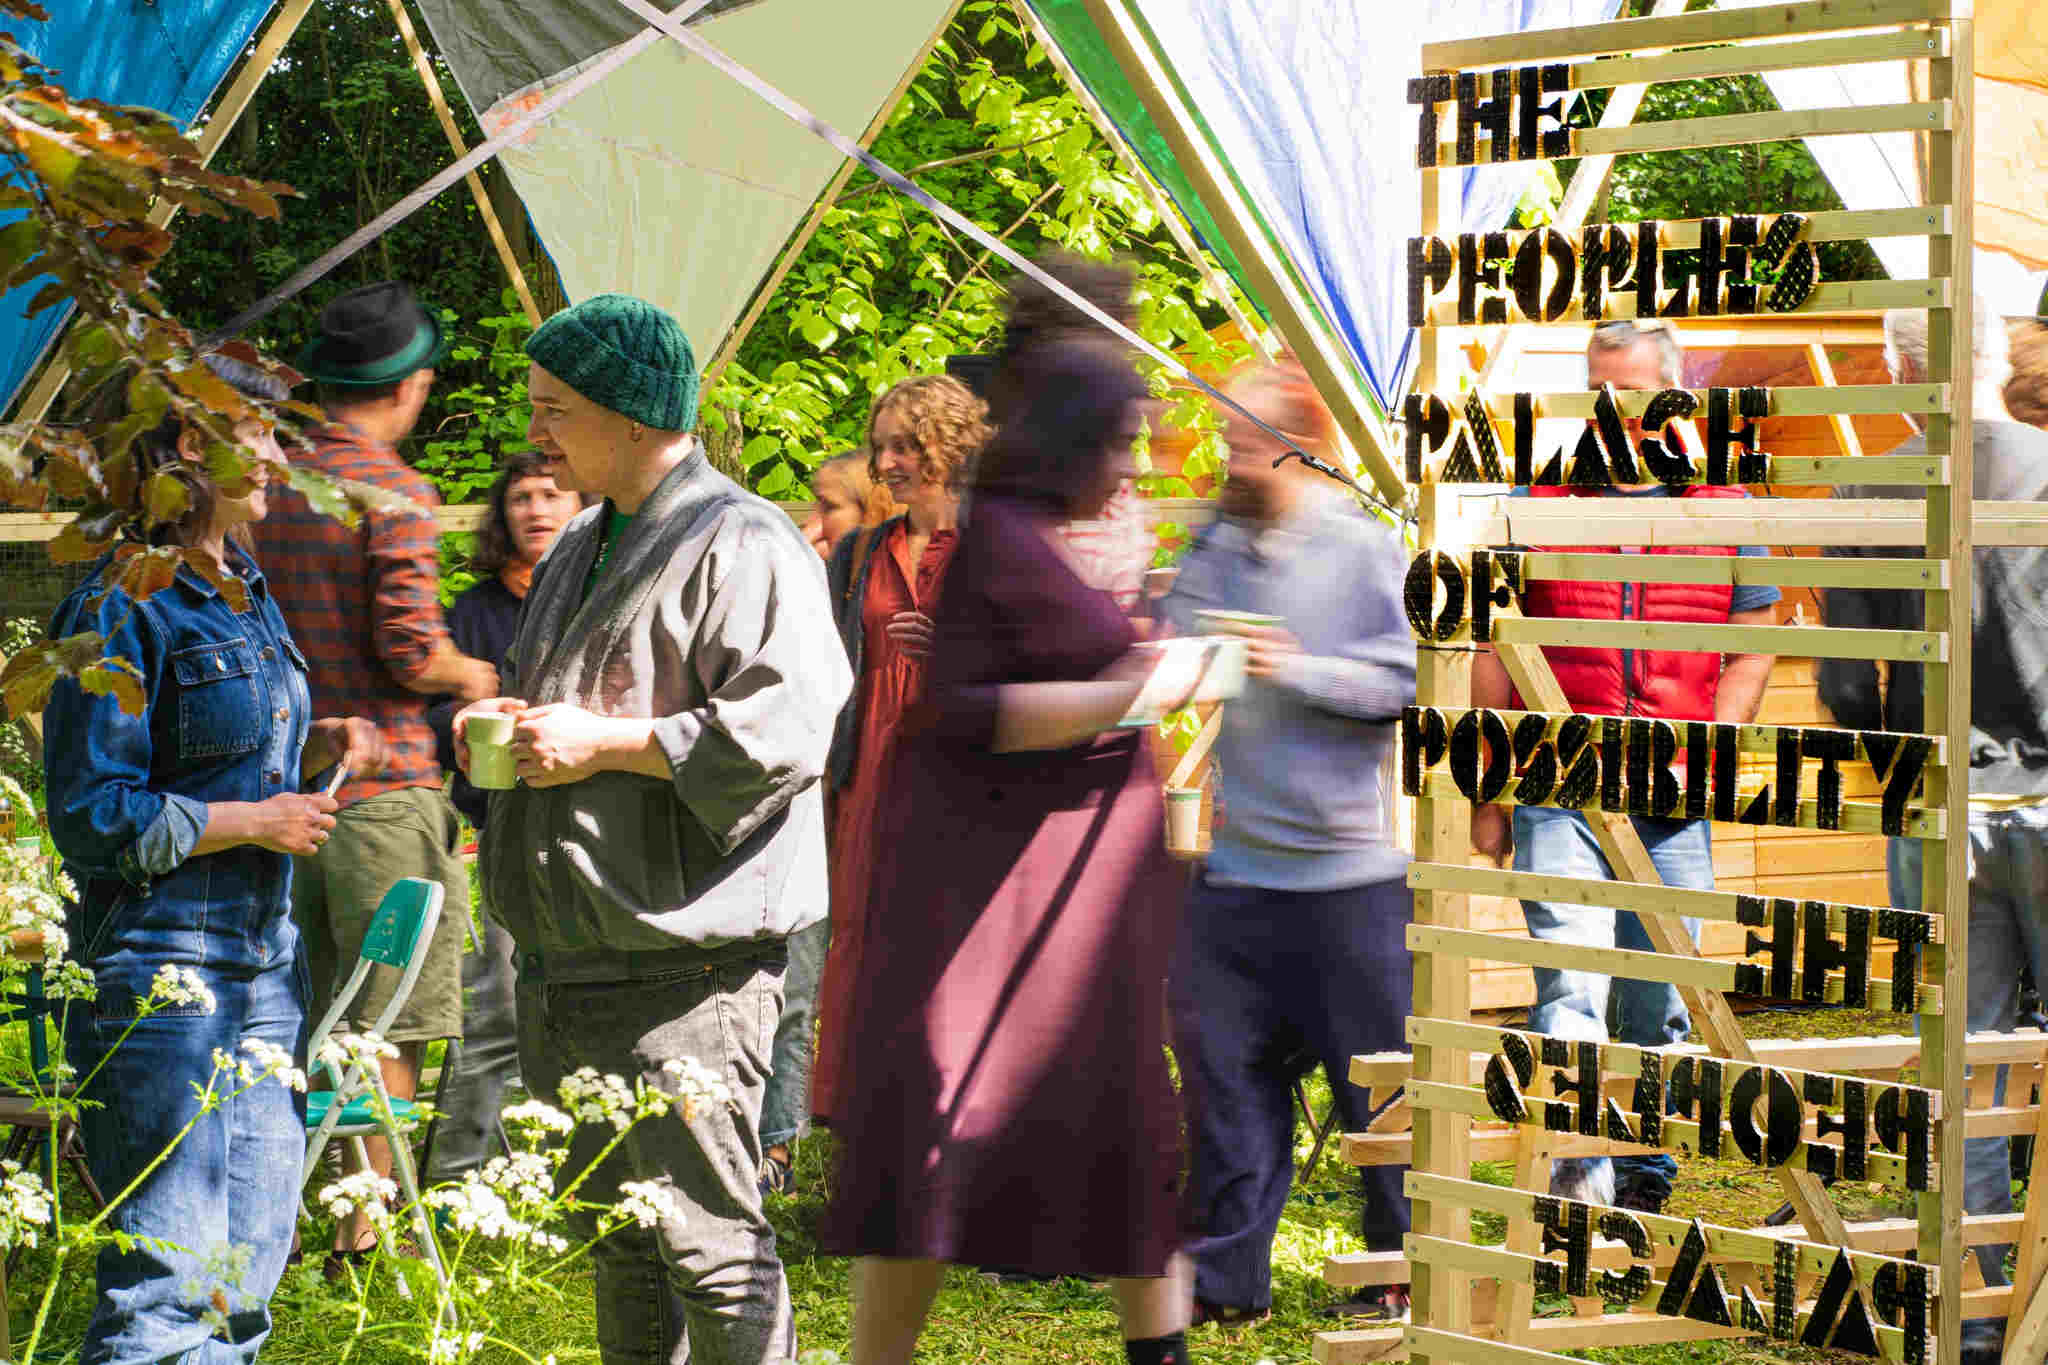 A door frame leading into a space with people walking inside The People's Palace - a geodesic dome. The people are blurred. A wooden door frame with slats leads into the space and has text on it which reads The People's Palace of Possibility. There is grass in the foreground and trees in the background.